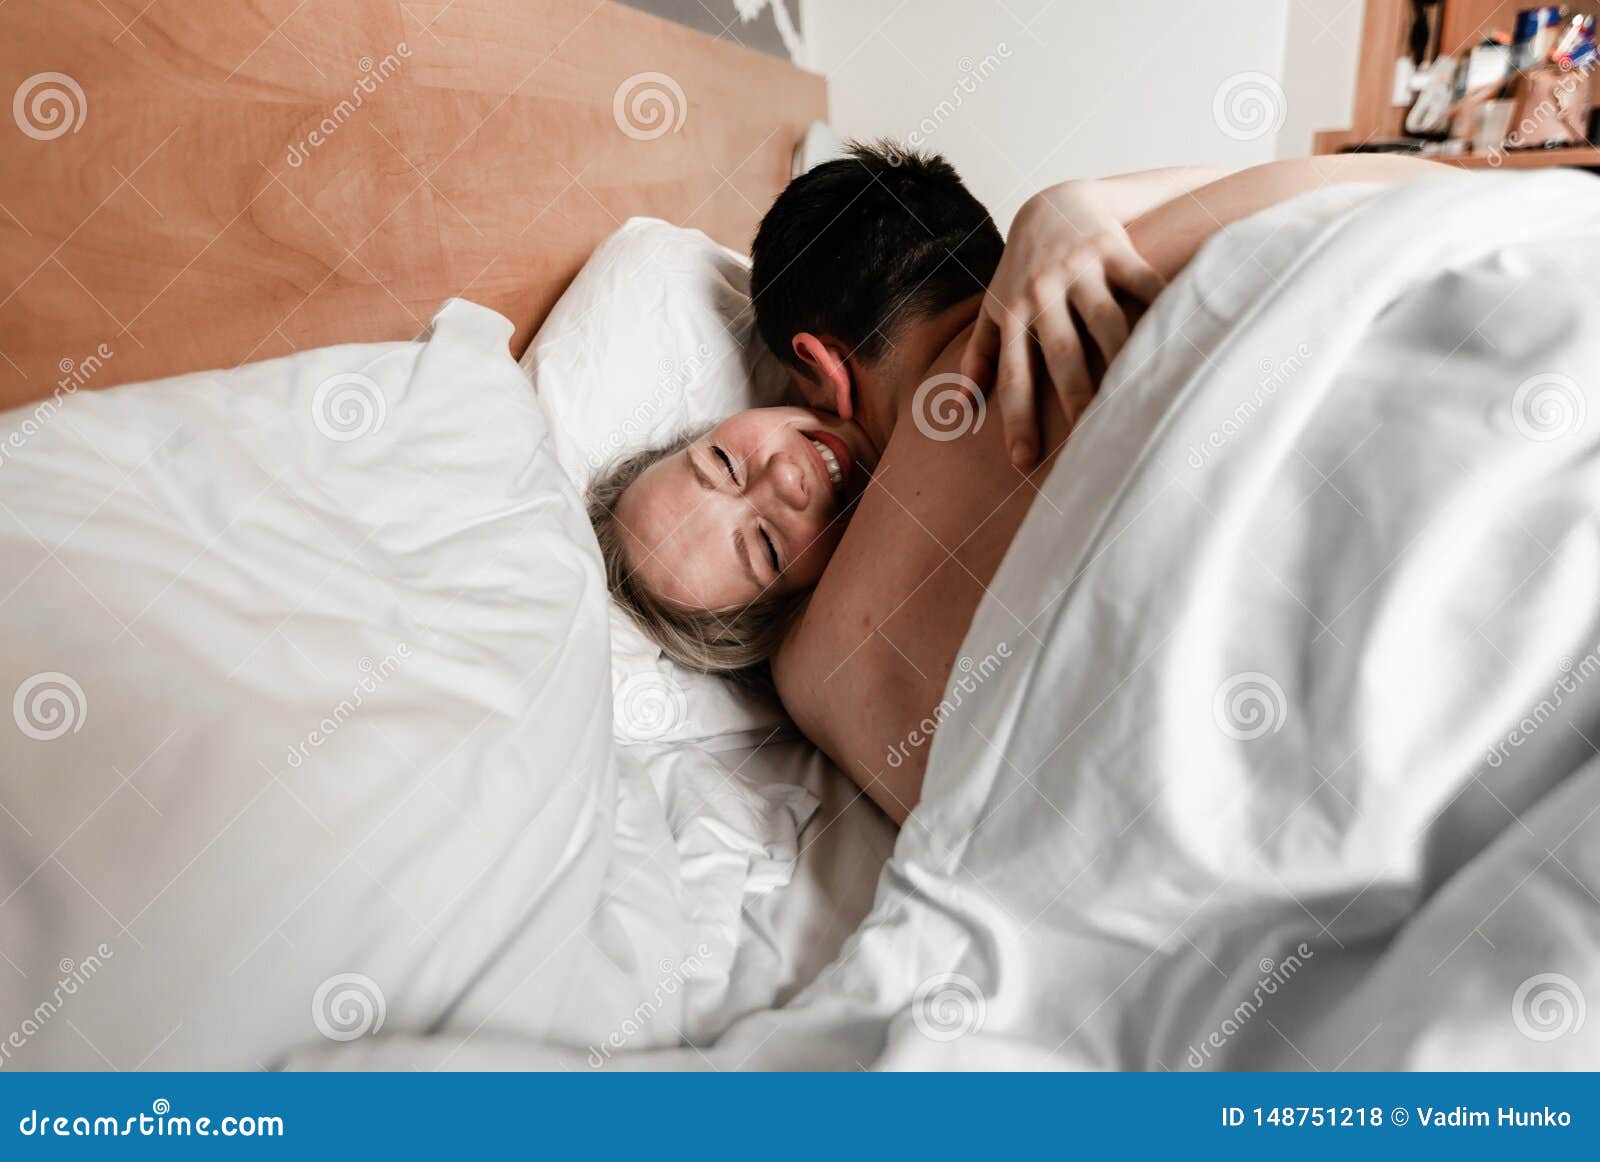 Beautiful Happy Young Couple or Family Waking Up Together in Bed Stock Photo image pic